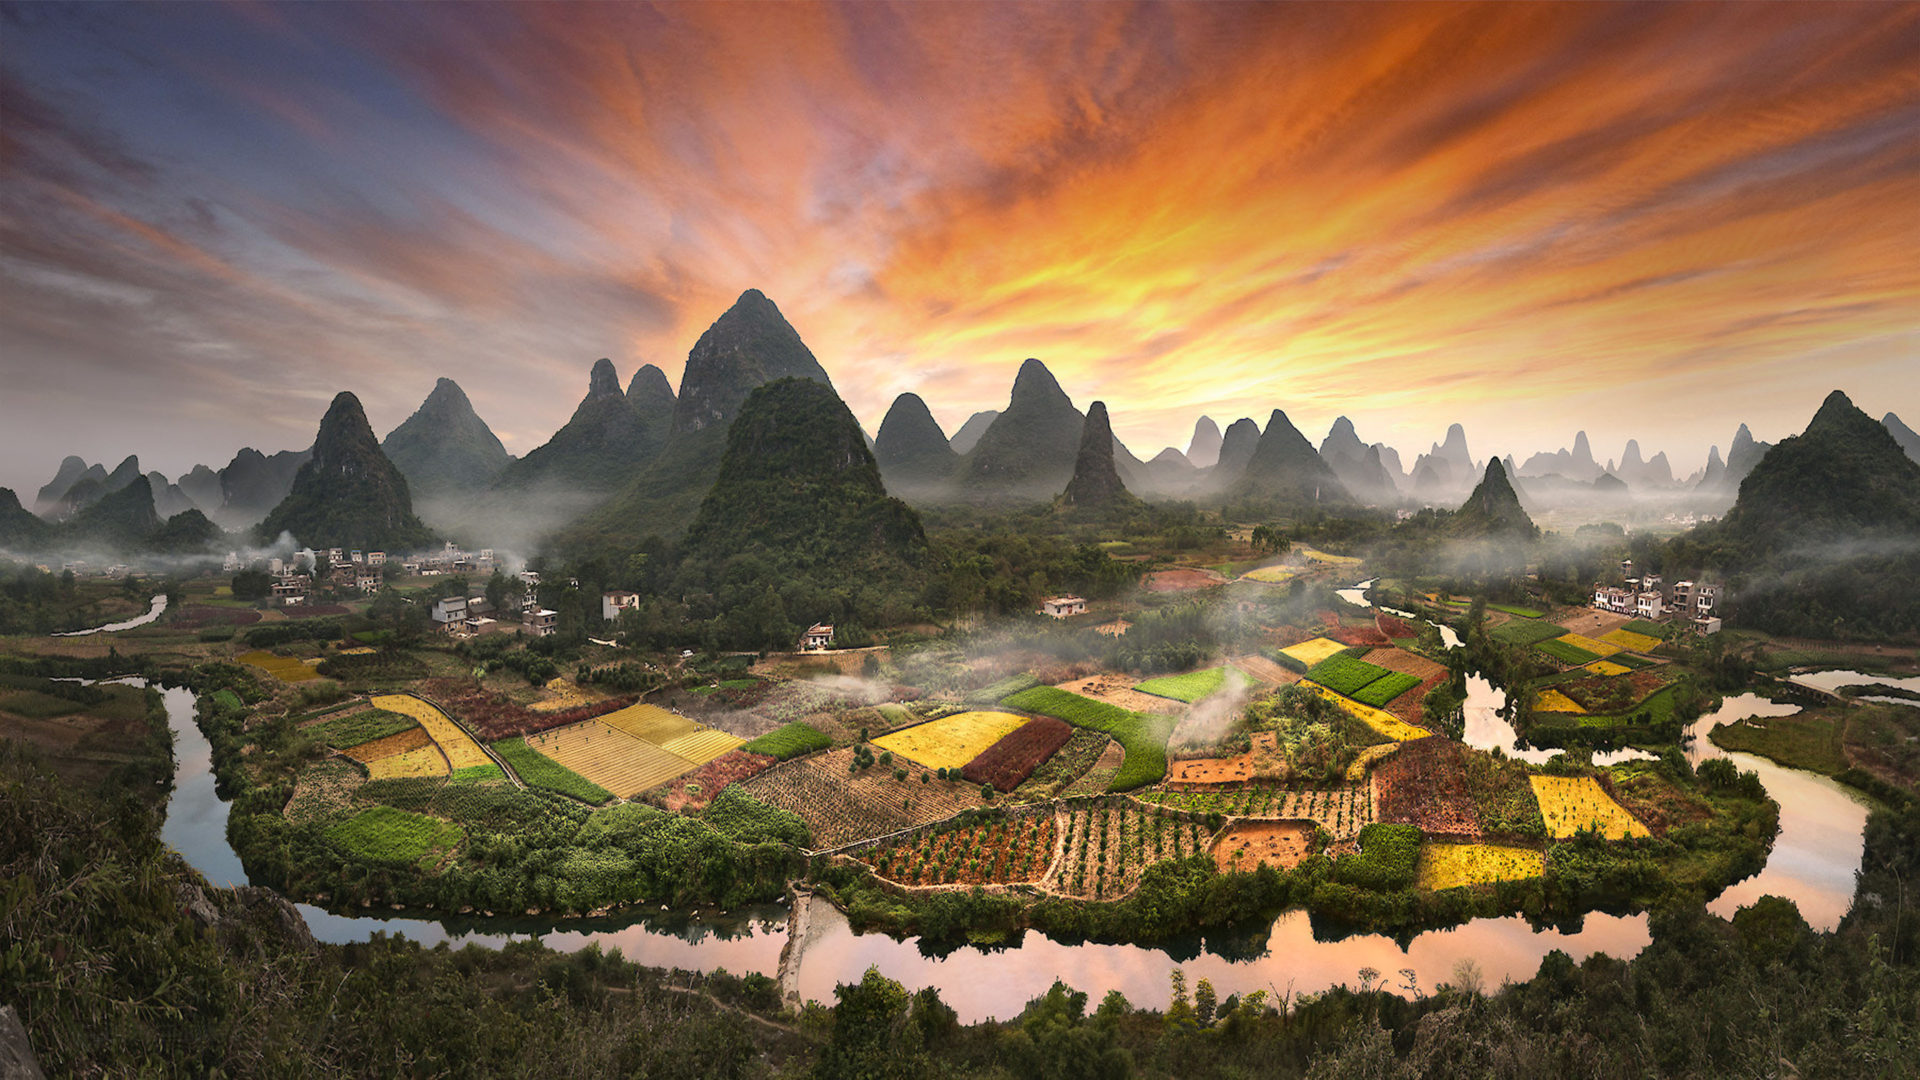 Cool Landscapes In China - HD Wallpaper 